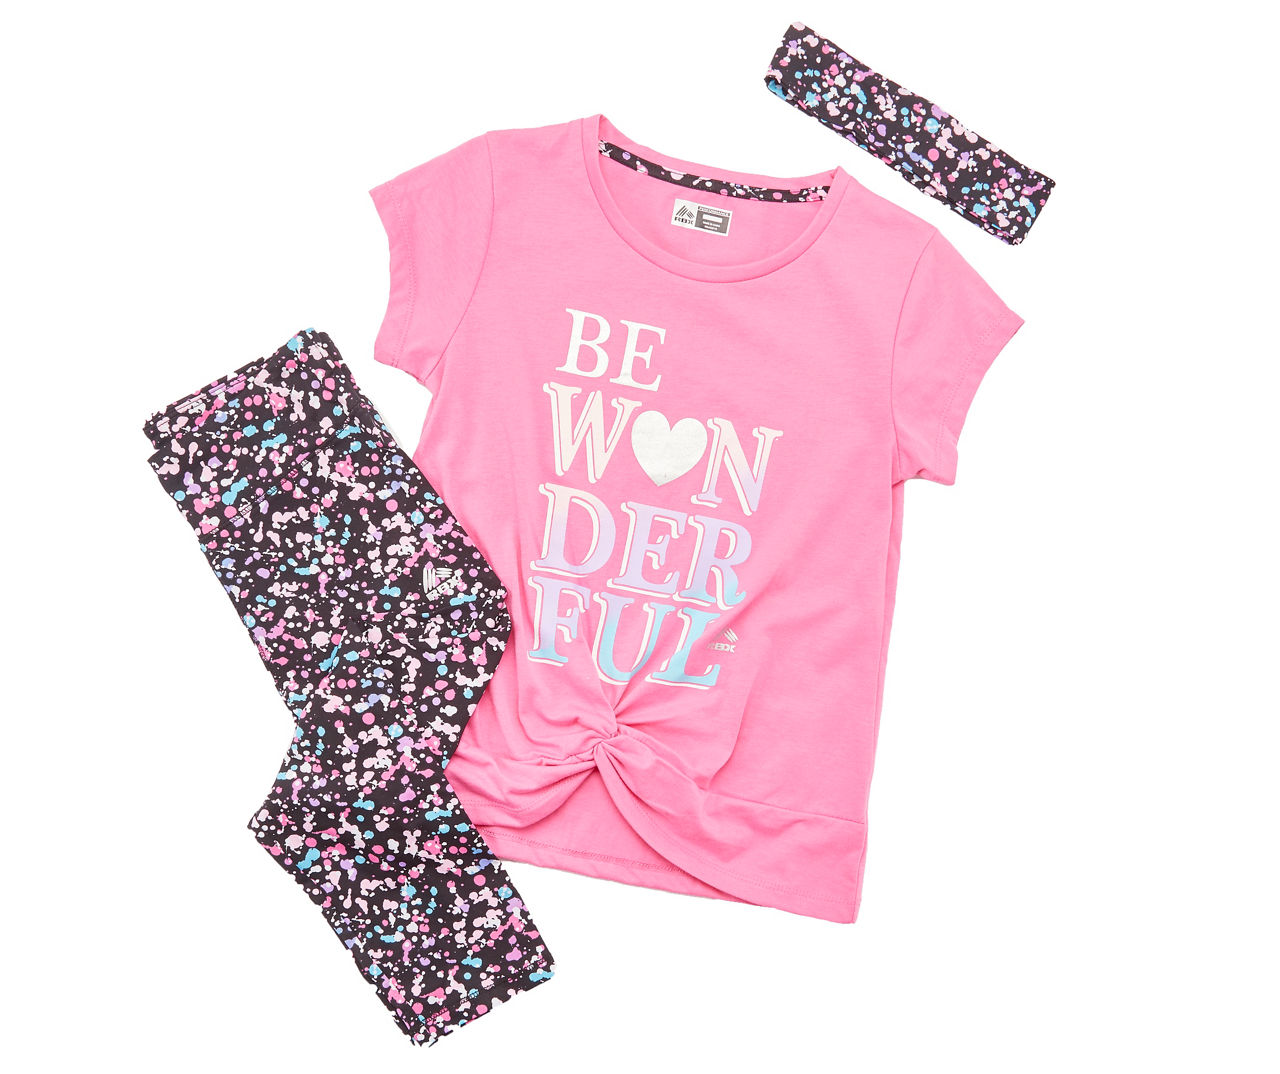 Kids' Size 10/12 "Be Wonderful" Pink & Black Paint Spatter 3-Piece Performance Outfit